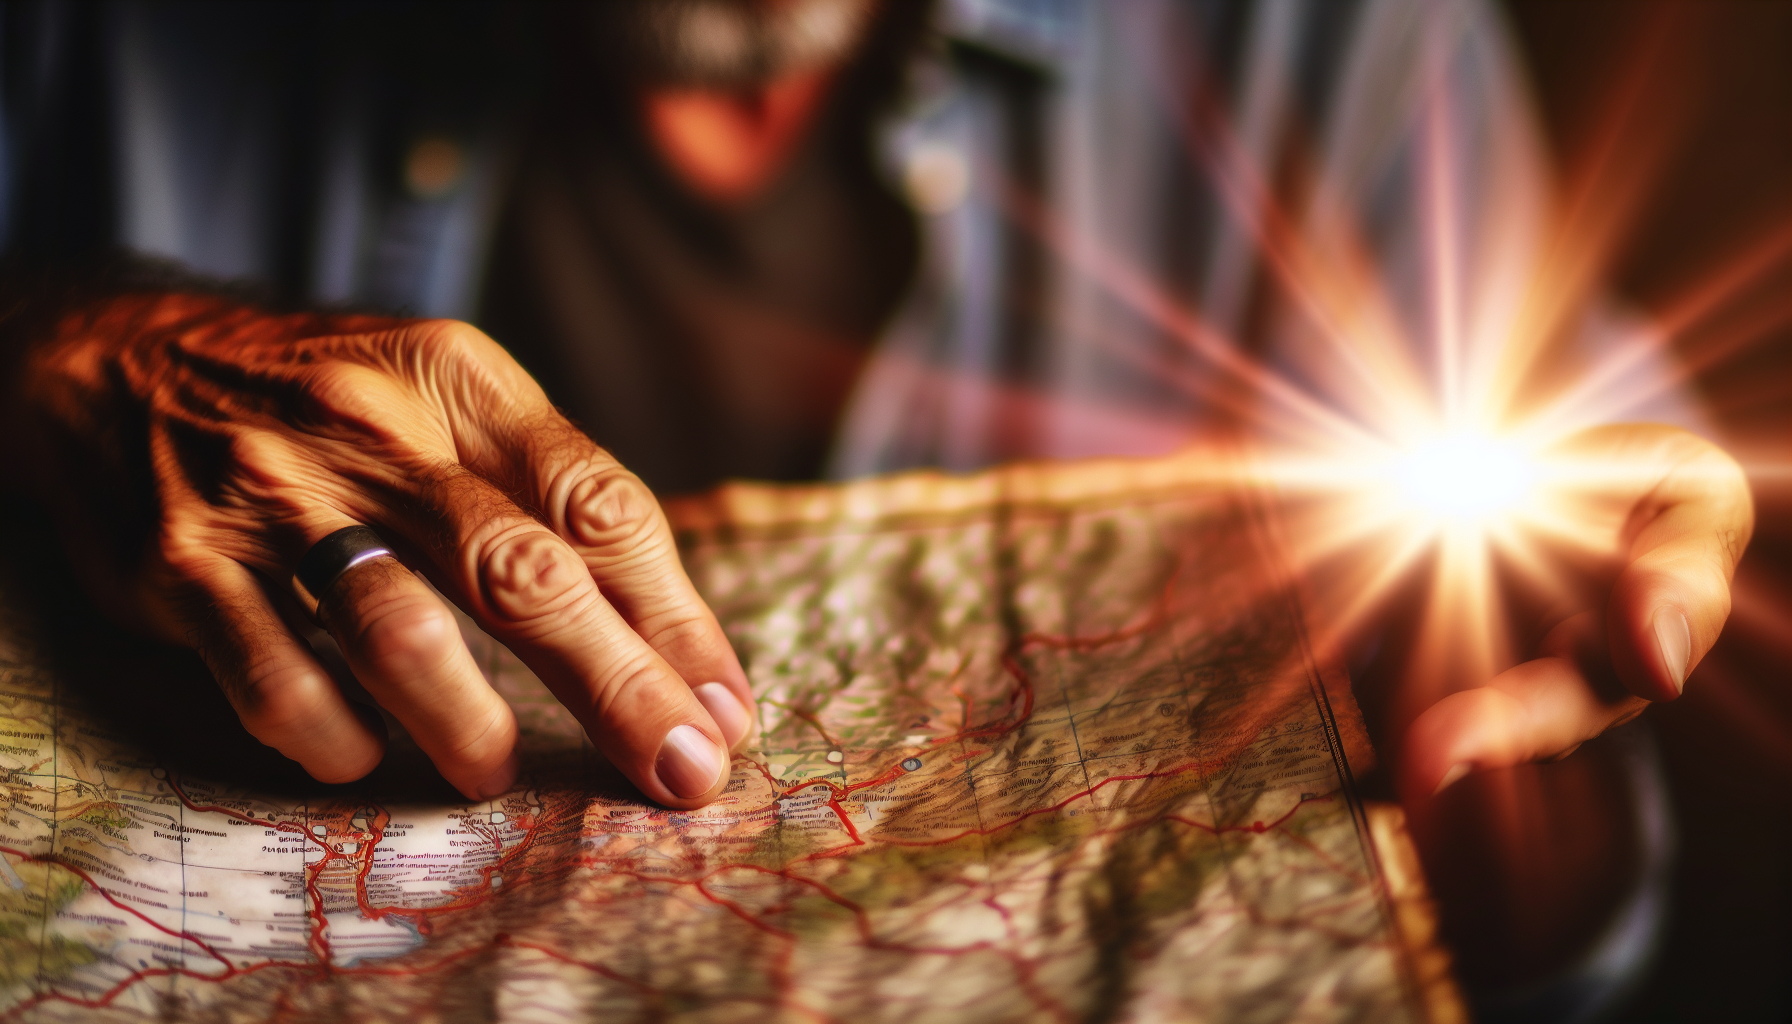 Traveler's hands holding a map with a guiding light shining on the destination